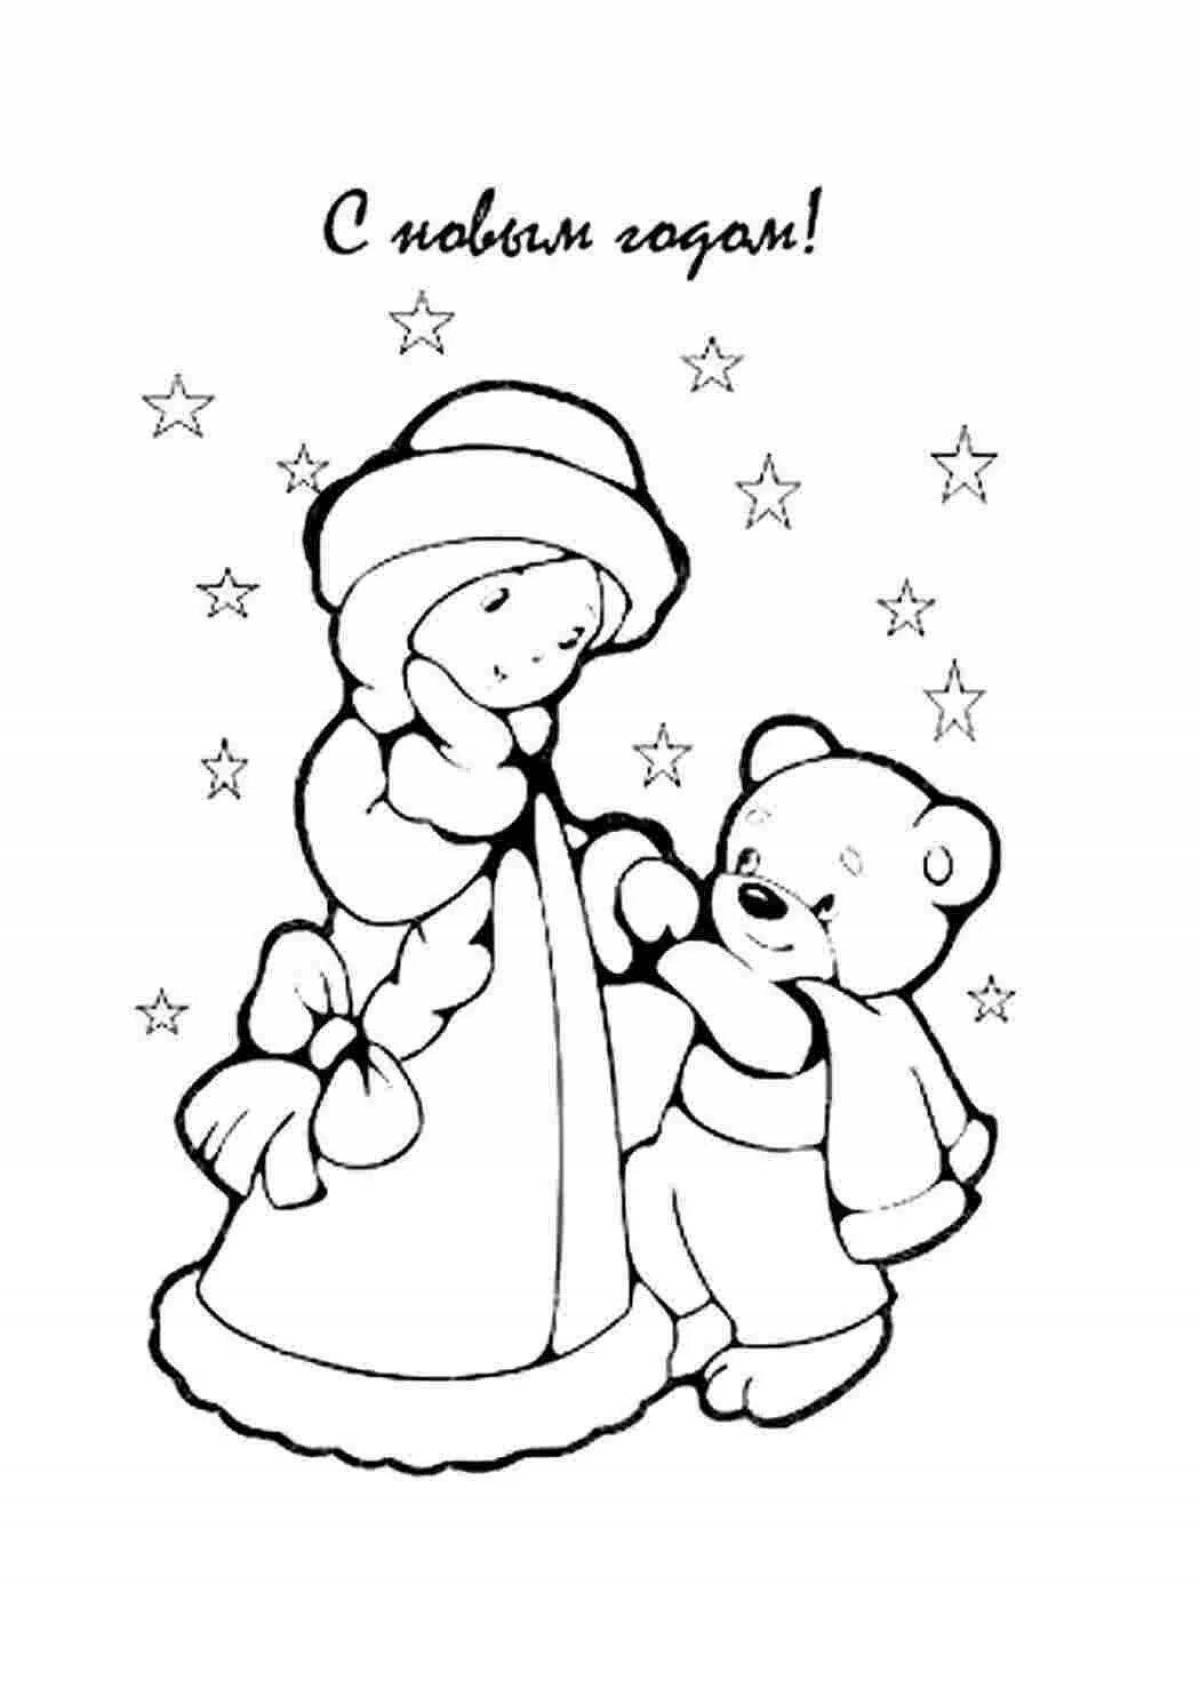 Mammy new year's grandiose coloring book